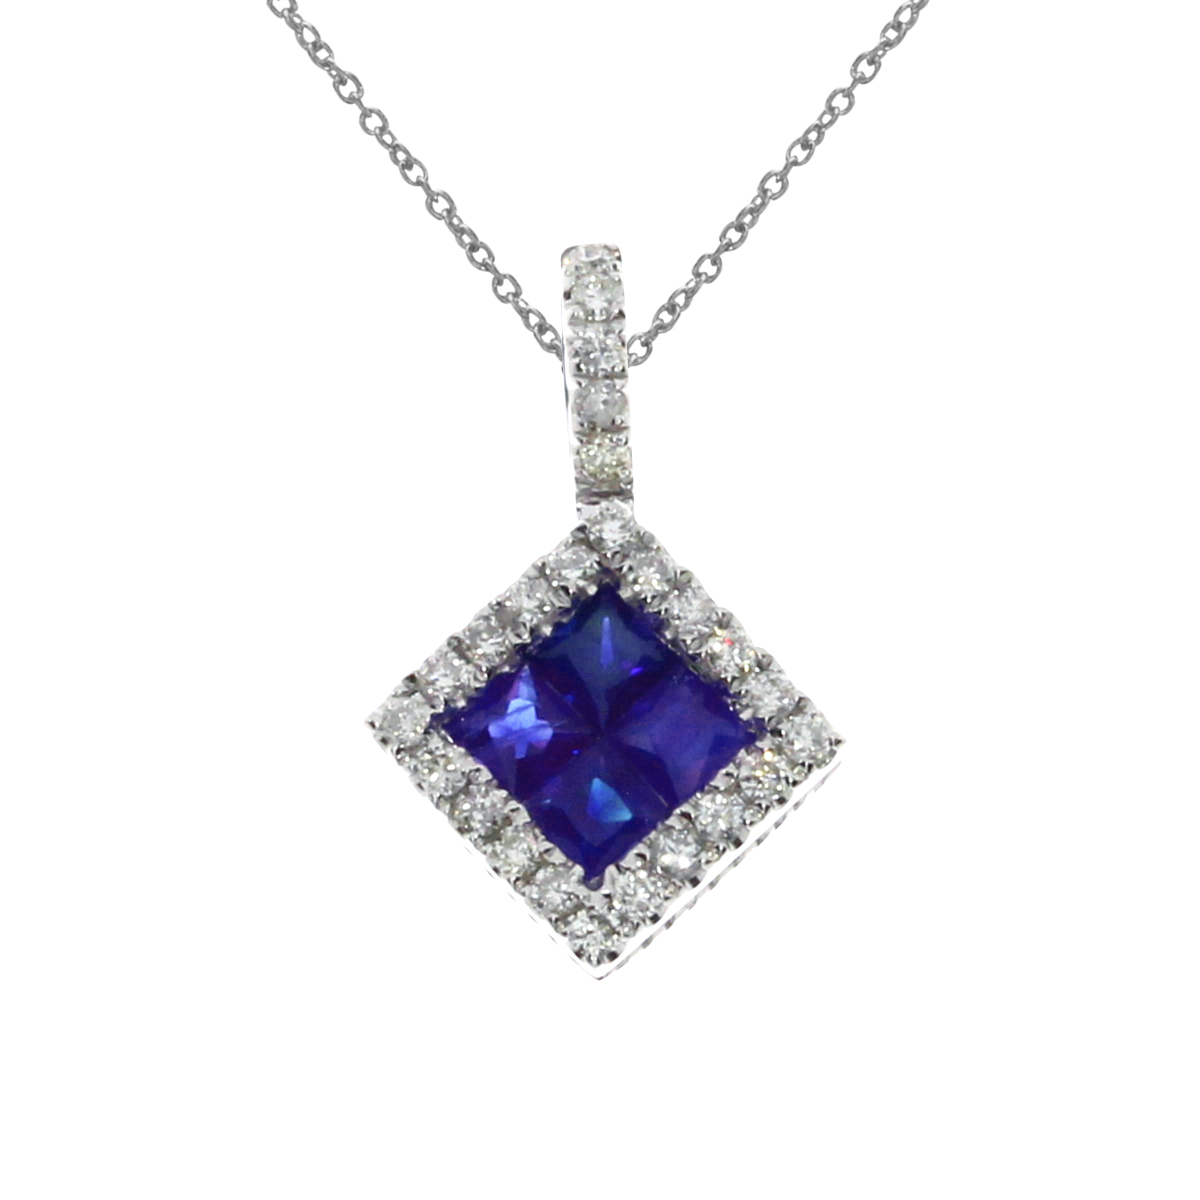 JCX2647: This sparkling pendant features four priness cut sapphires and .14 ct diamonds set in 14k white gold.